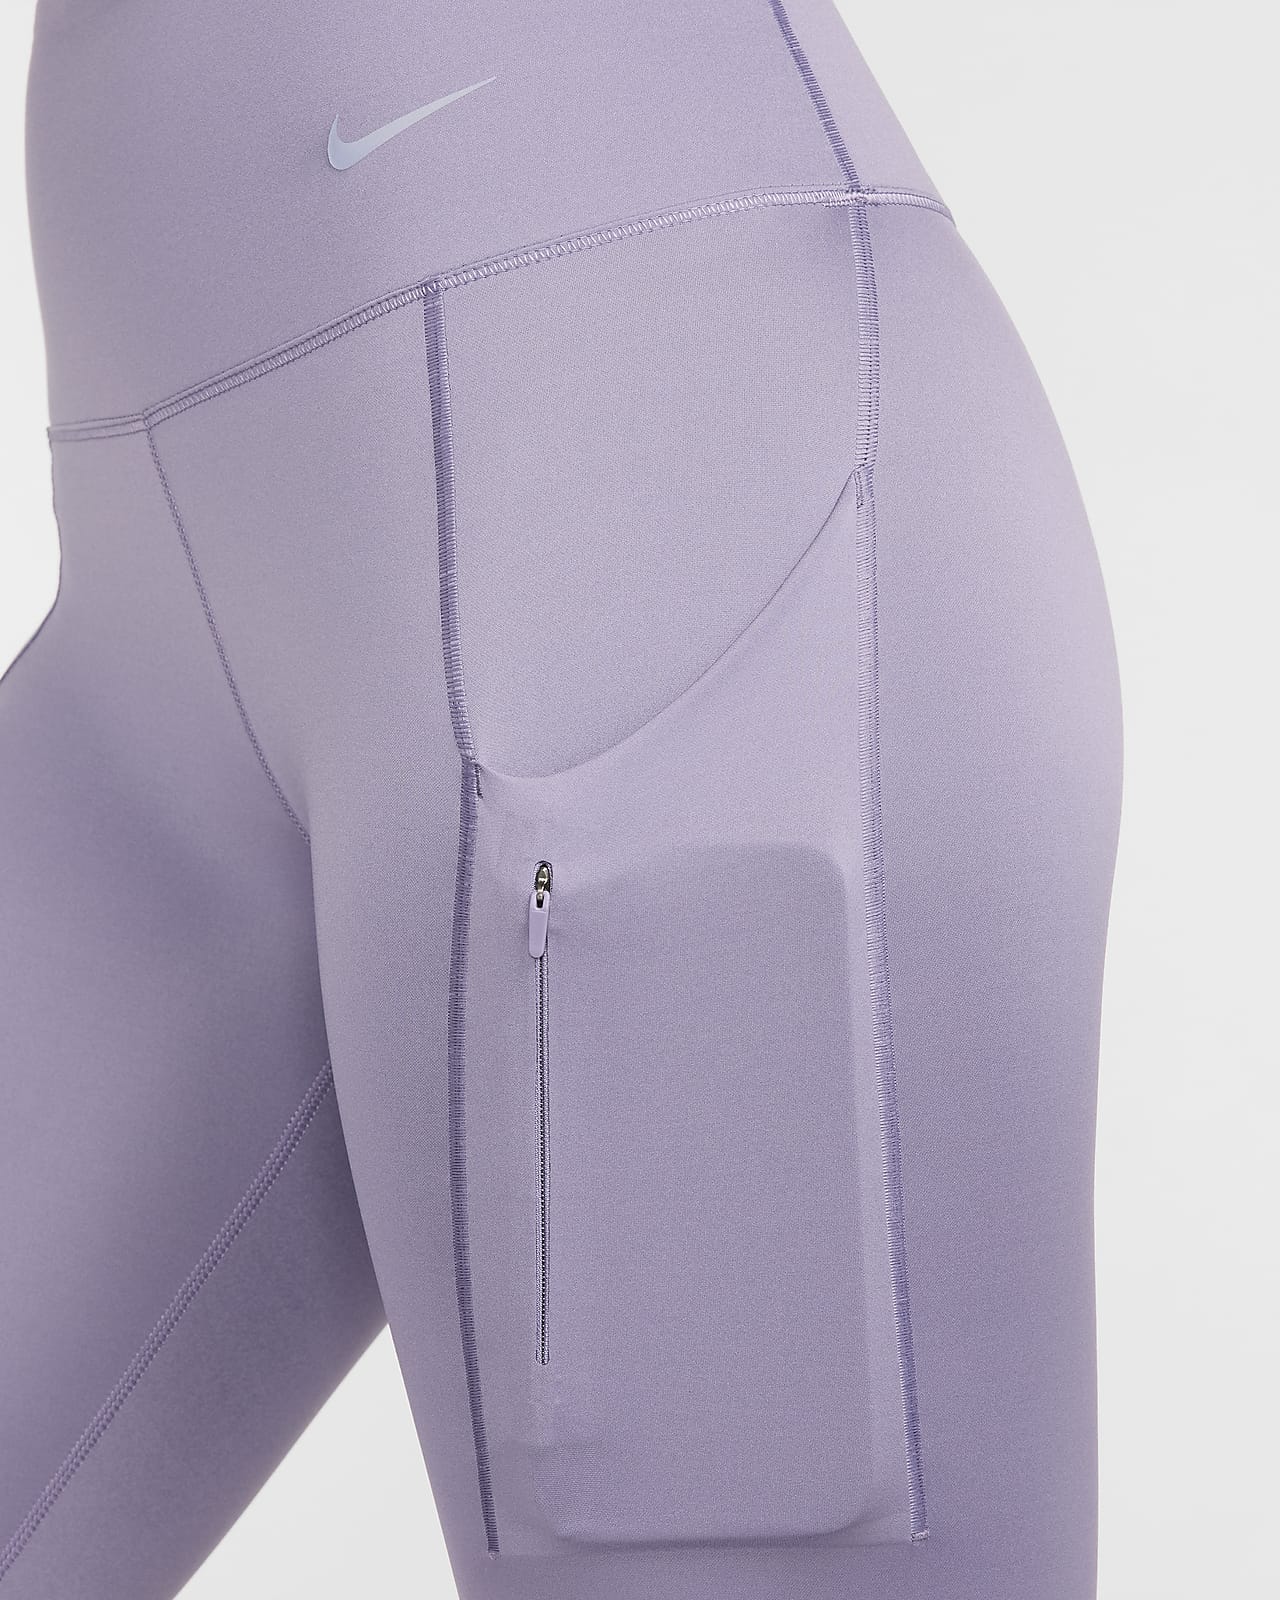 Nike Go Women's Firm-Support High-Waisted 7/8 Leggings with Pockets